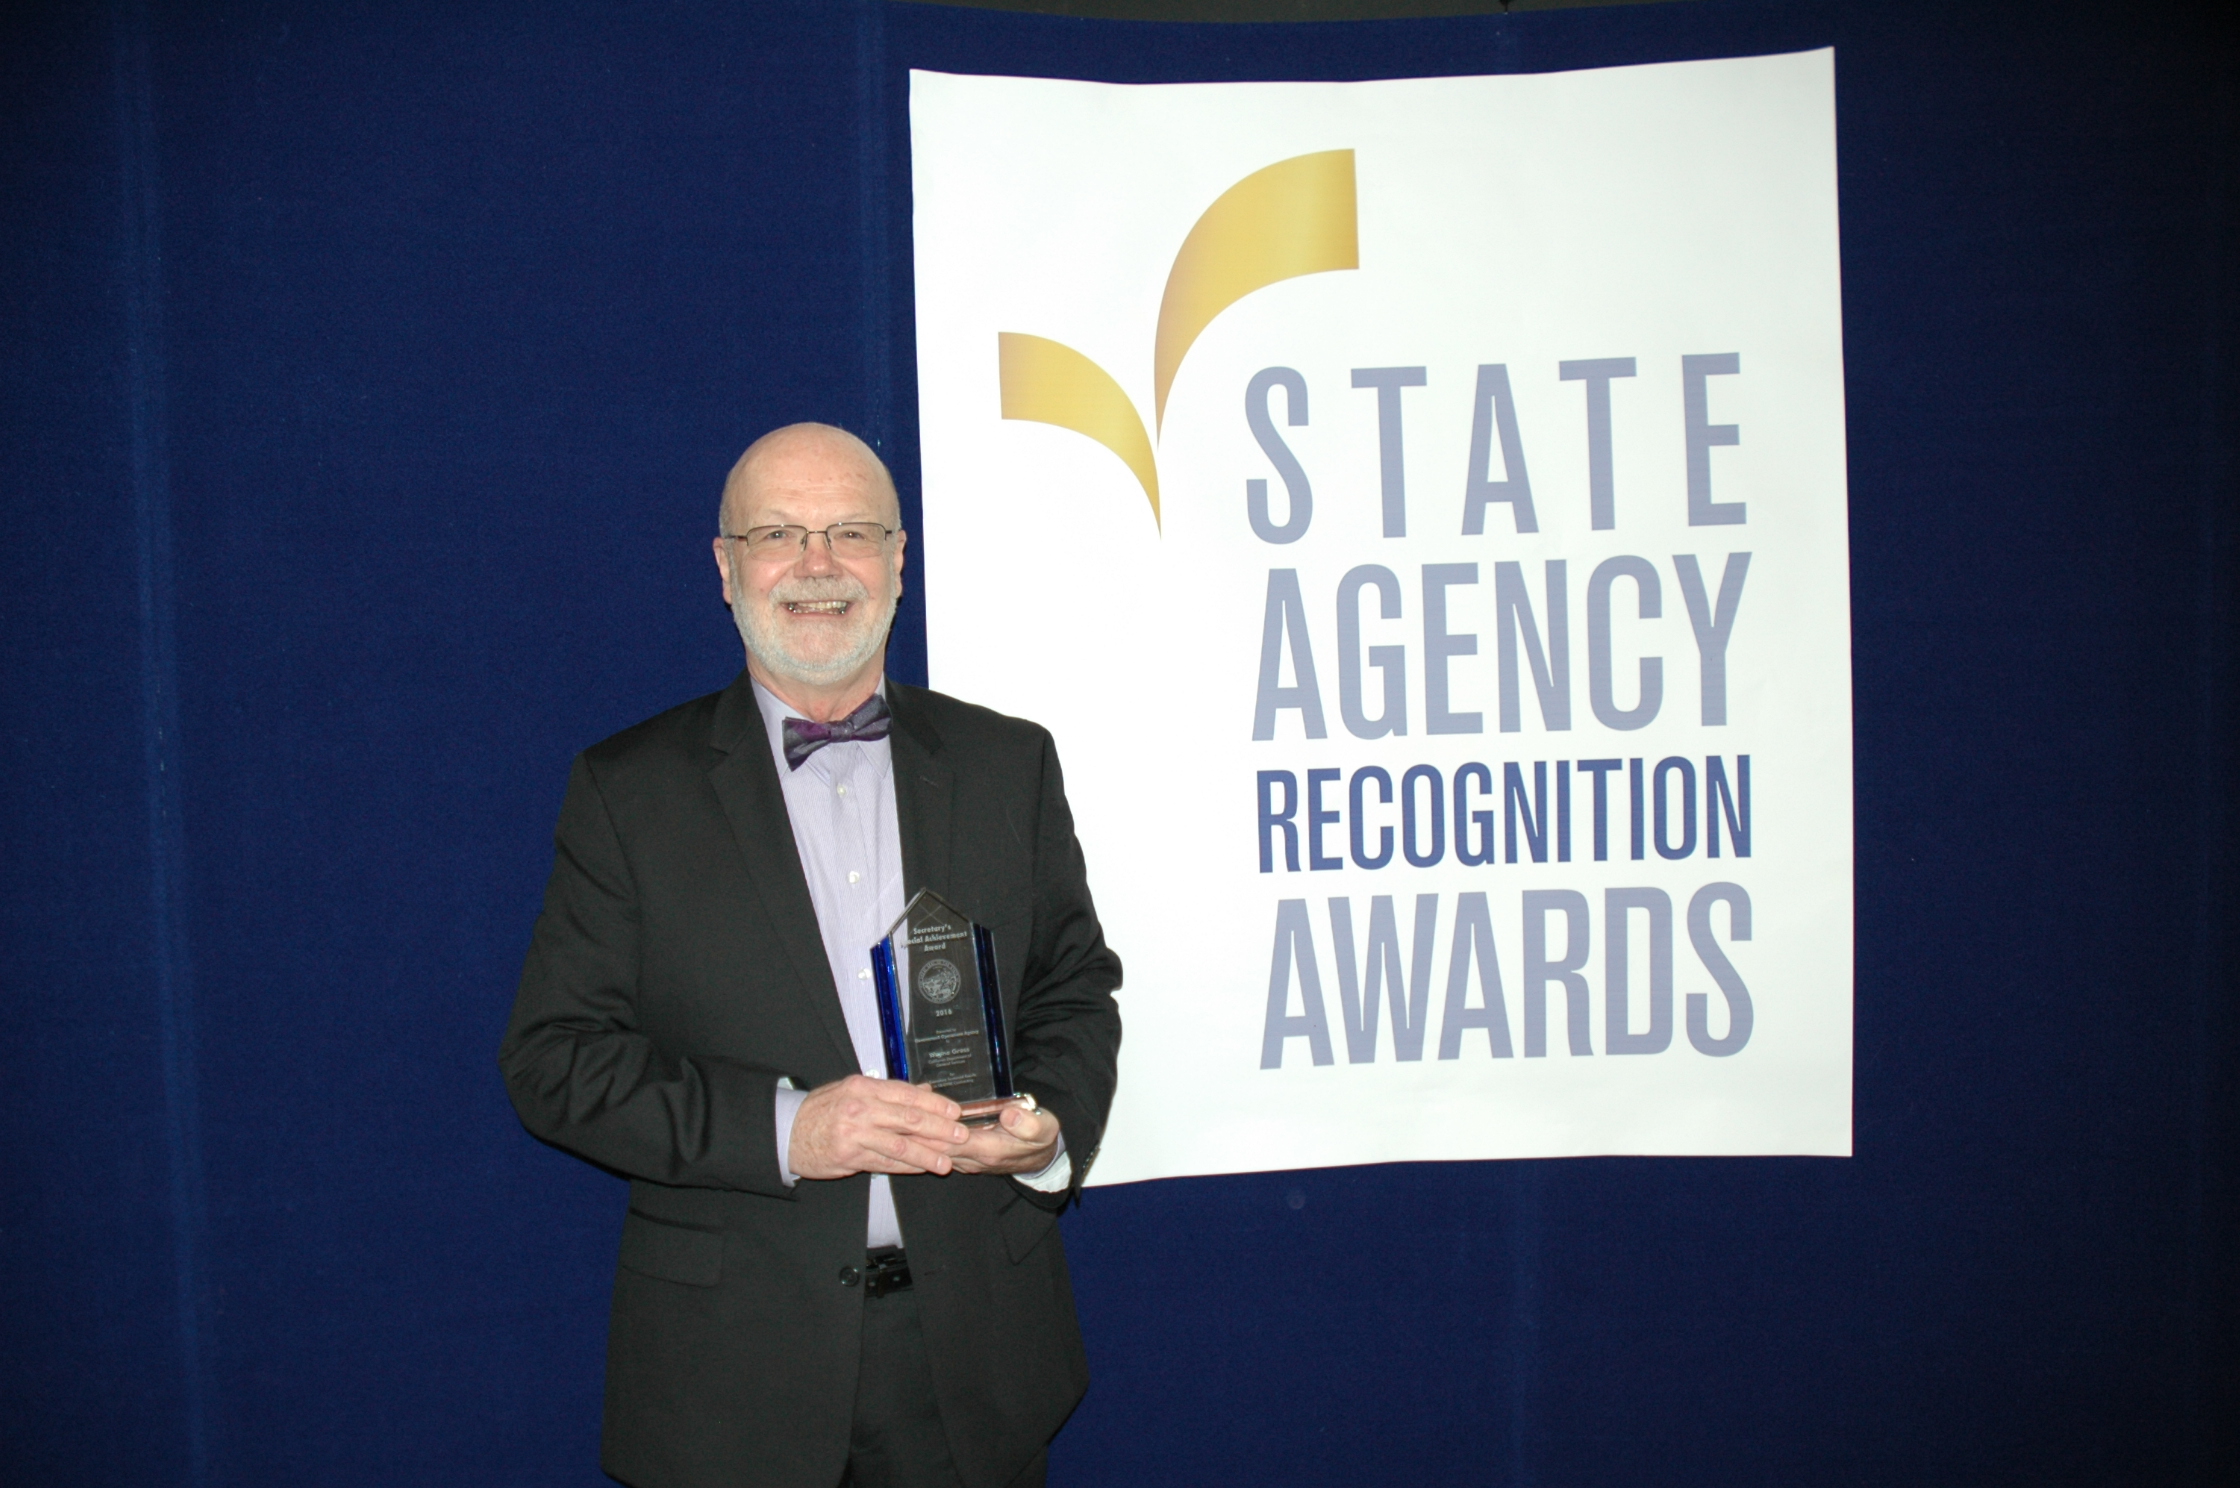 Wayne Gross, Department of general services, accepts the Secretary's special achievement award